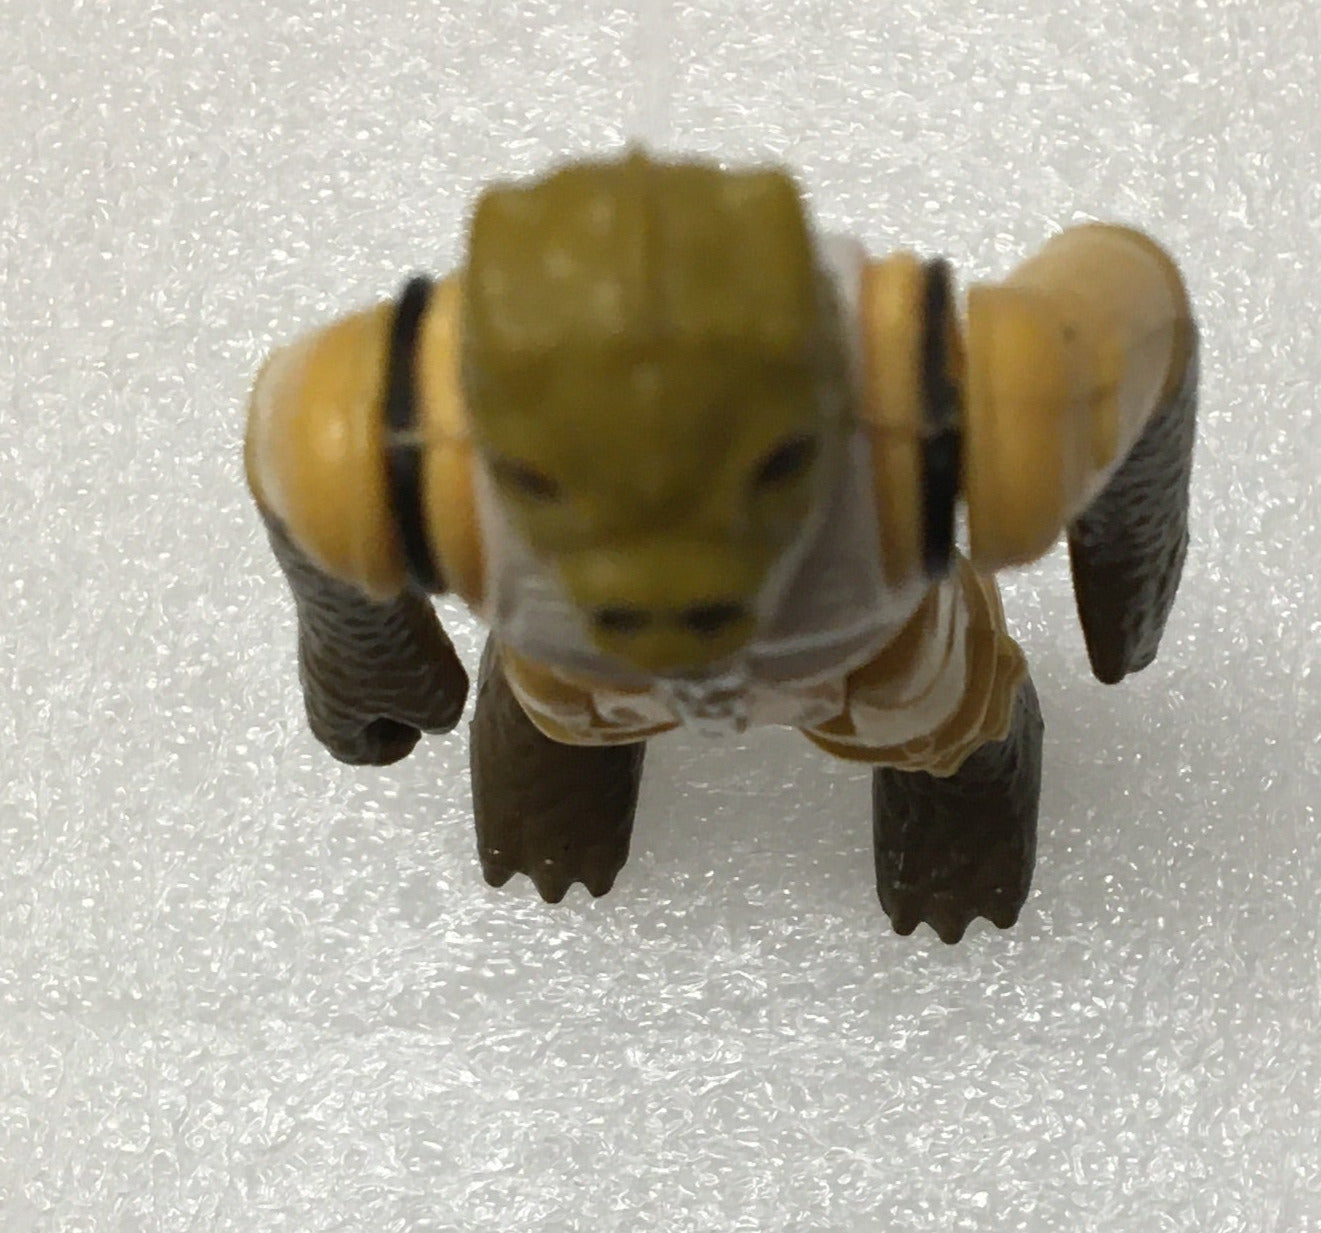 Star Wars Bossk loose figure with weapon blaster | L.A. Mood Comics and Games